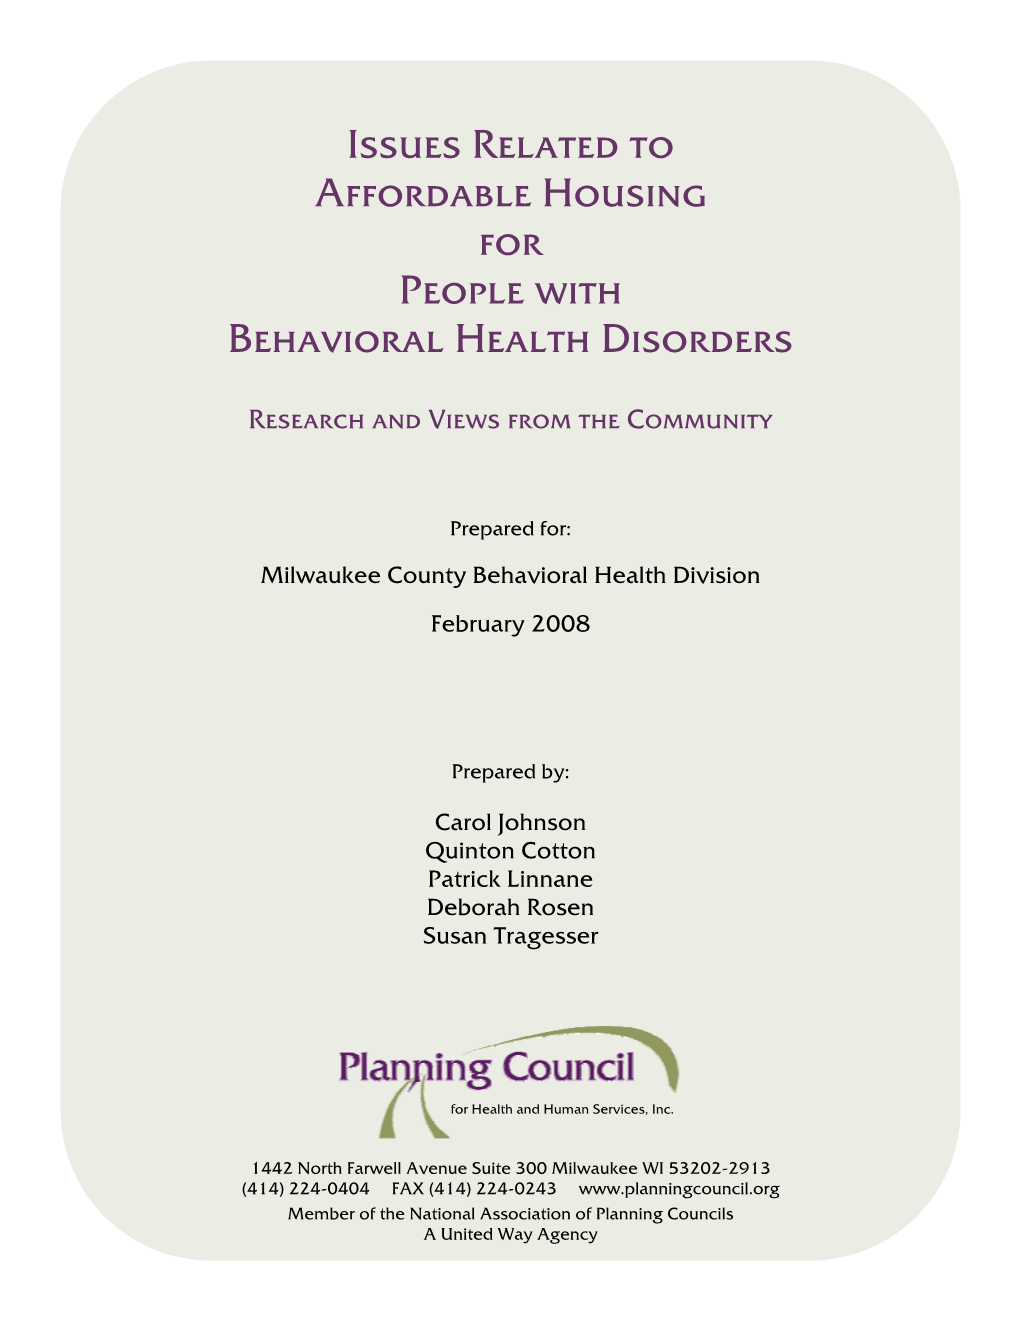 Housing for People with Behavioral Health Disorders February 2008